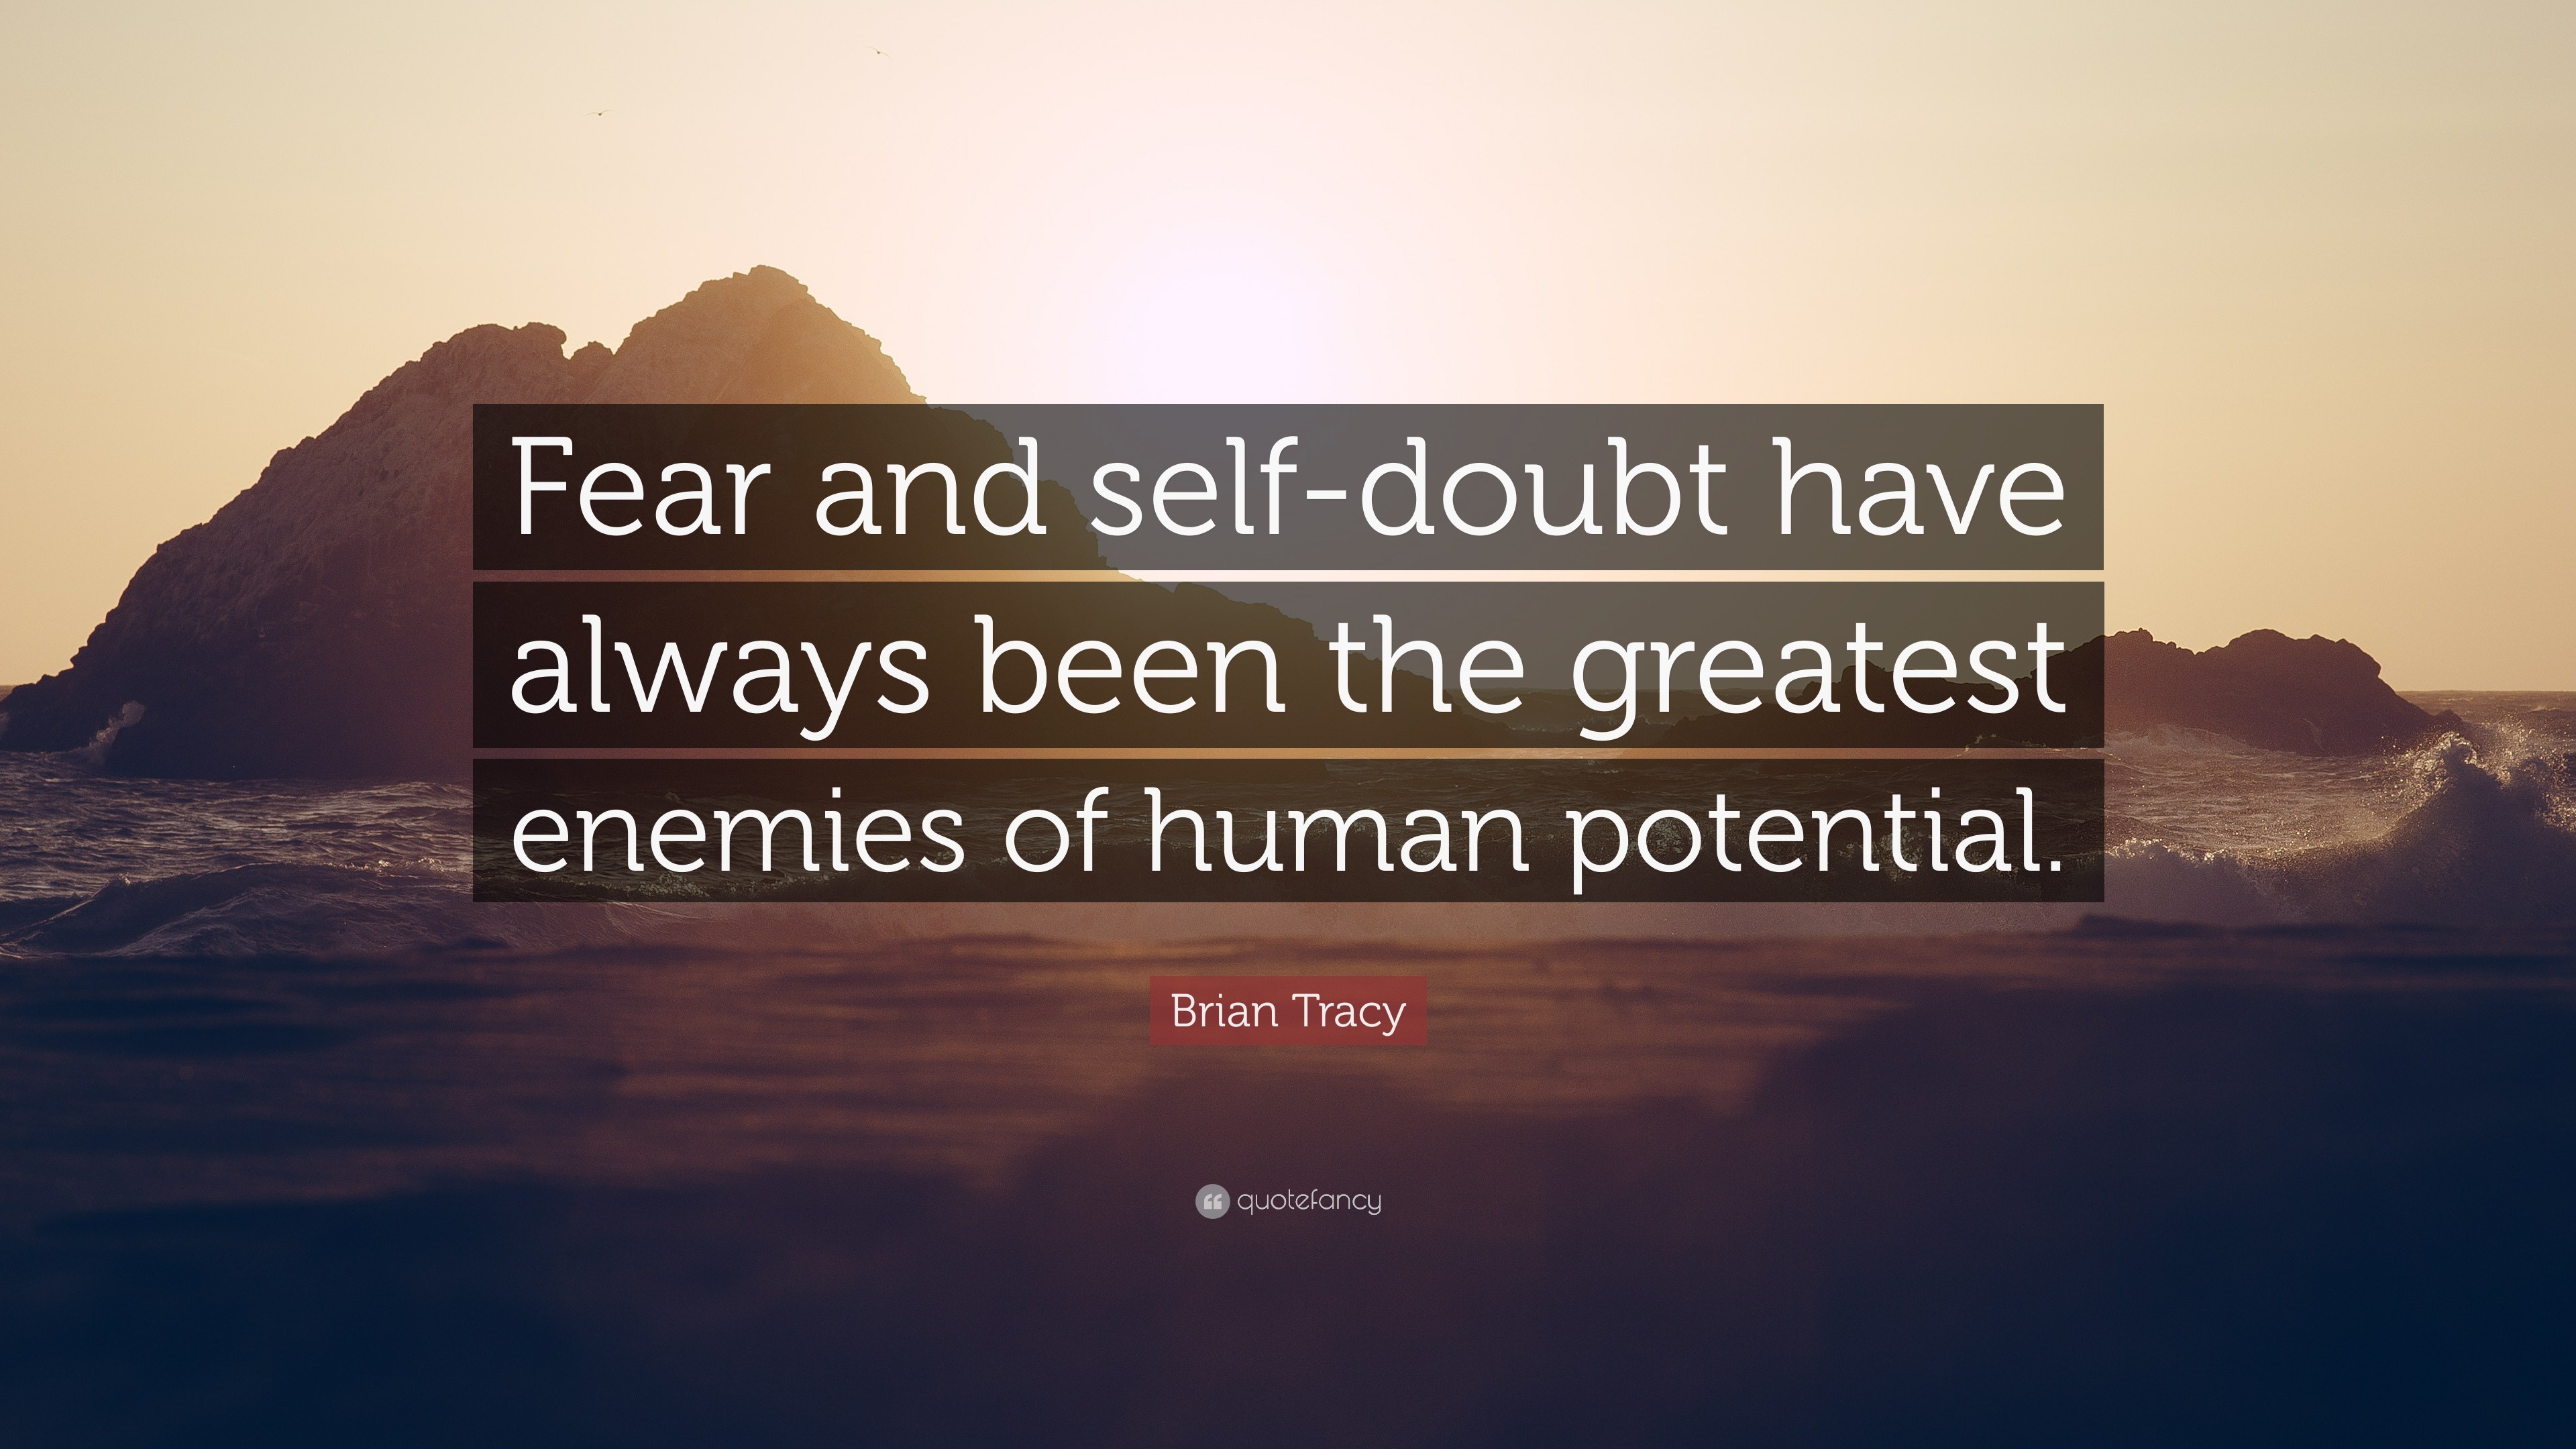 4746433 Brian Tracy Quote Fear and self doubt have always been the